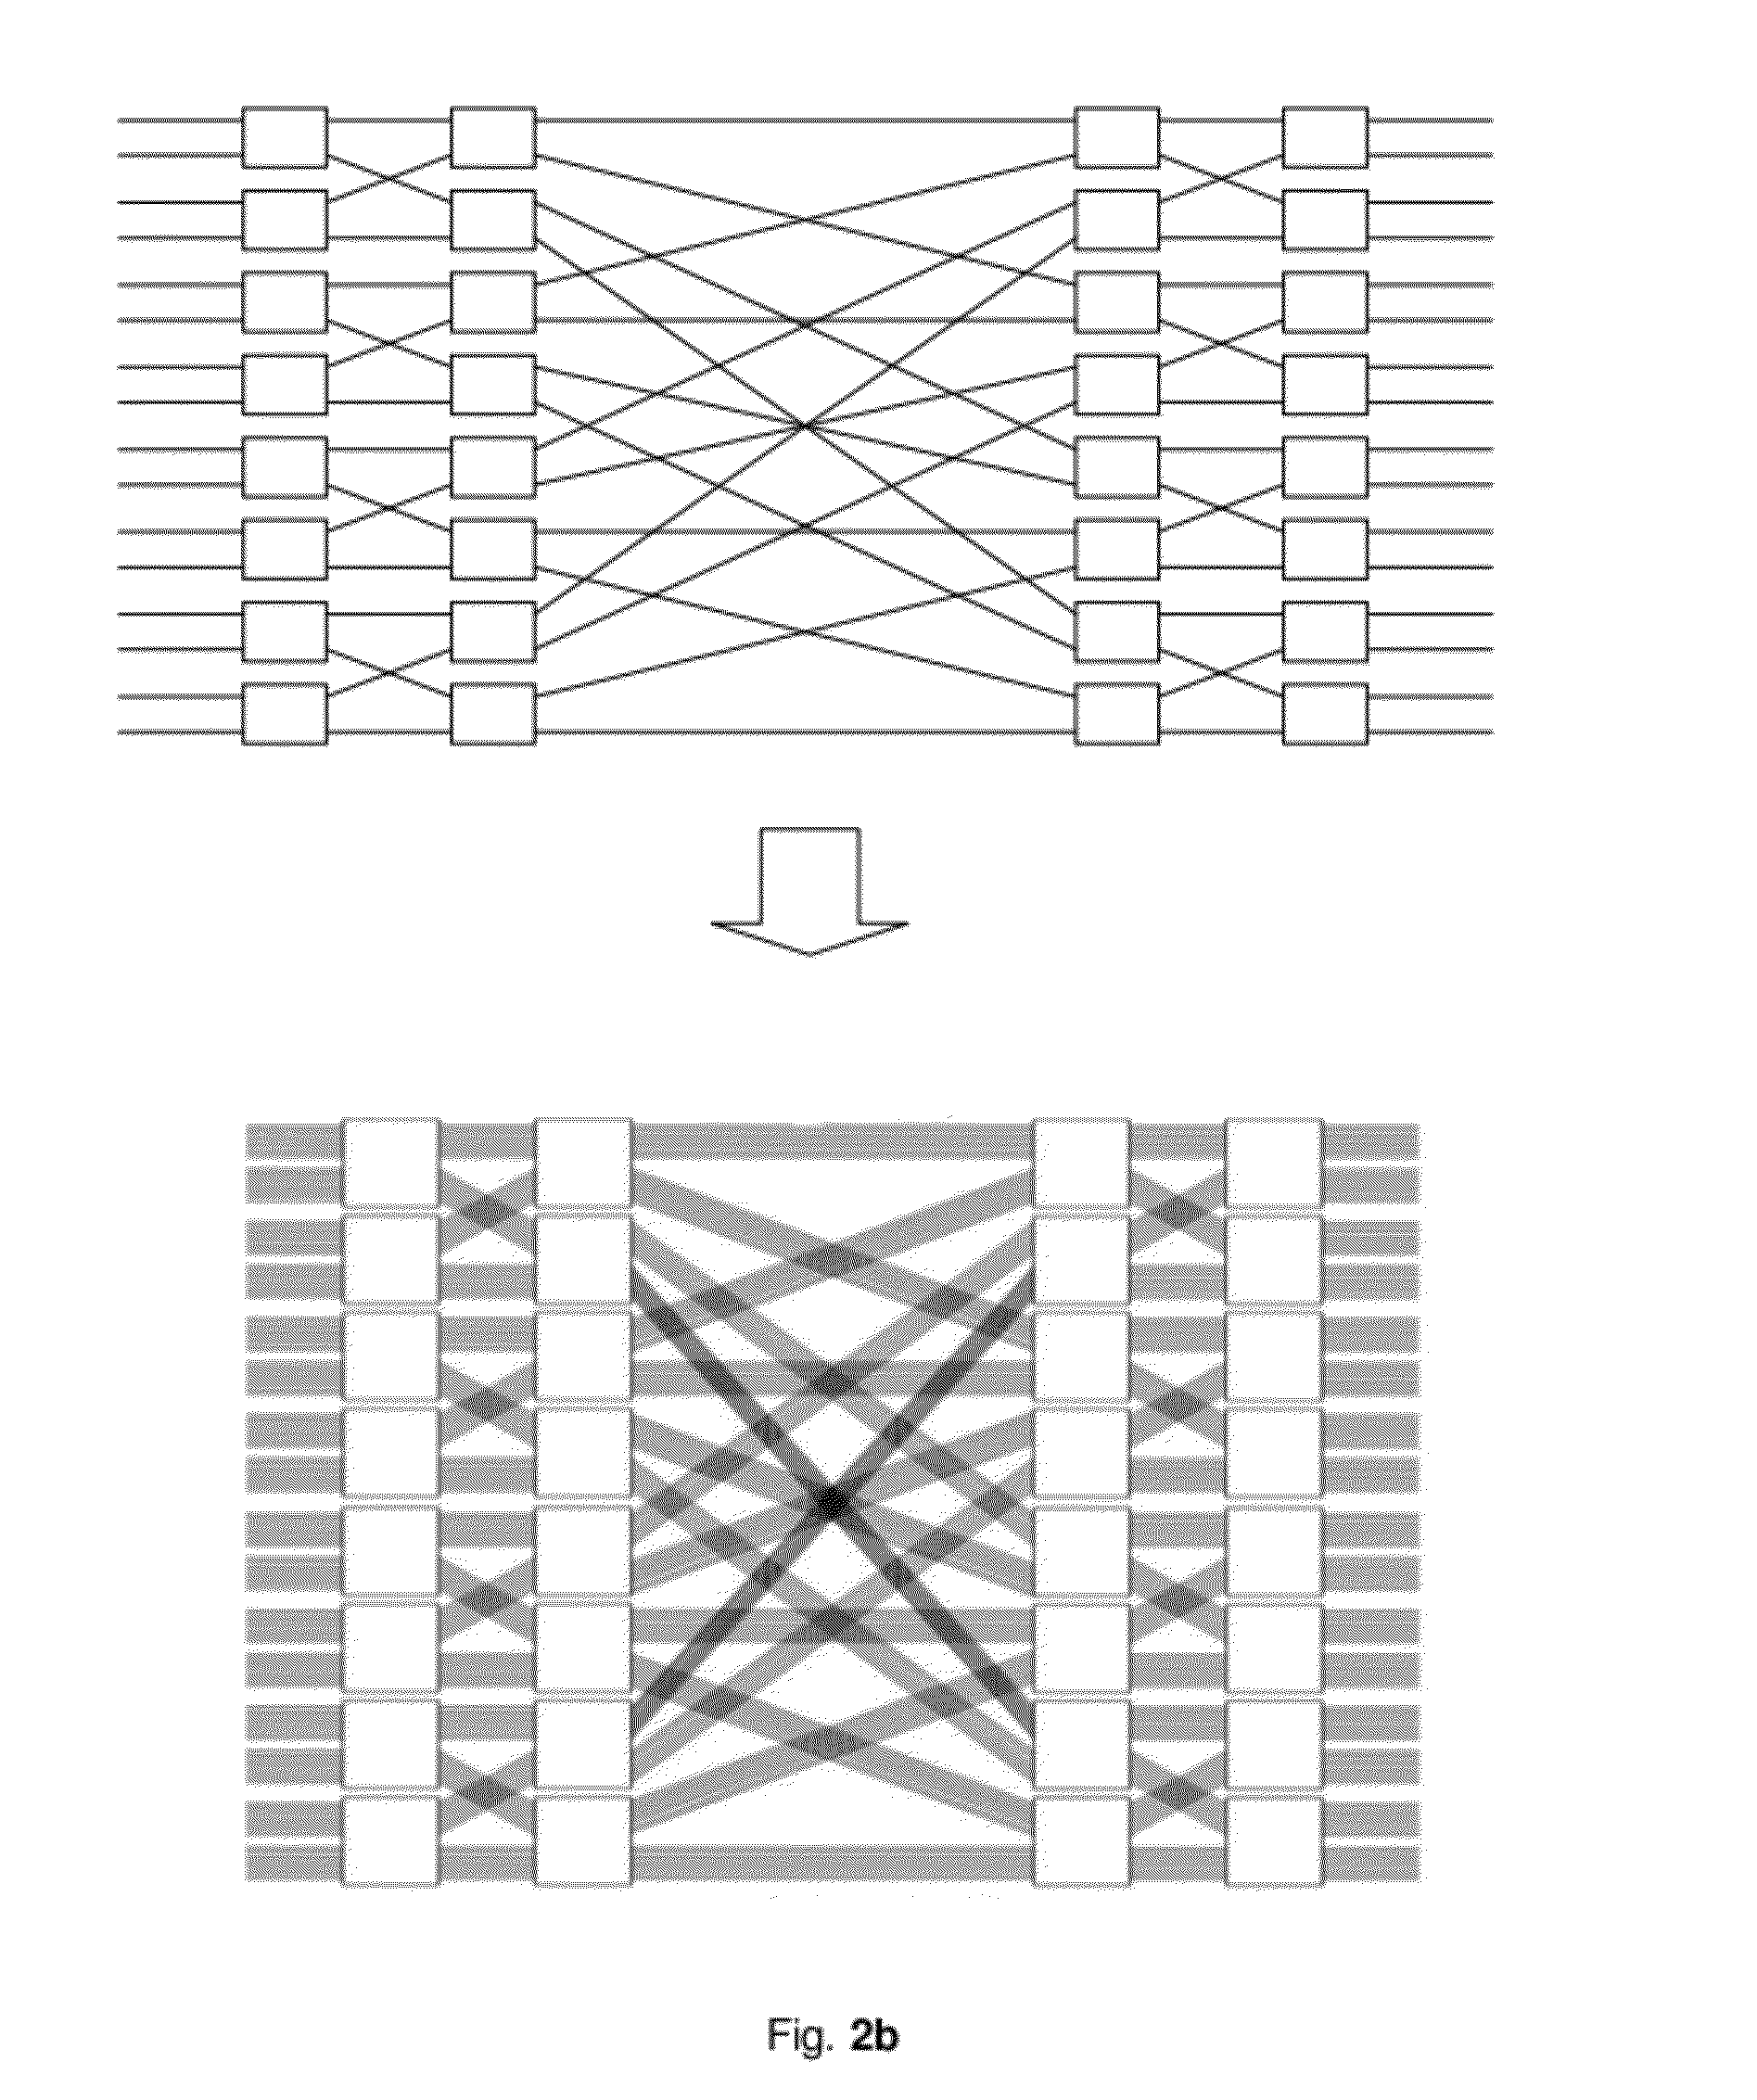  Load-Balancing Structure for Packet Switches with Minimum Buffers Complexity and its Building Method